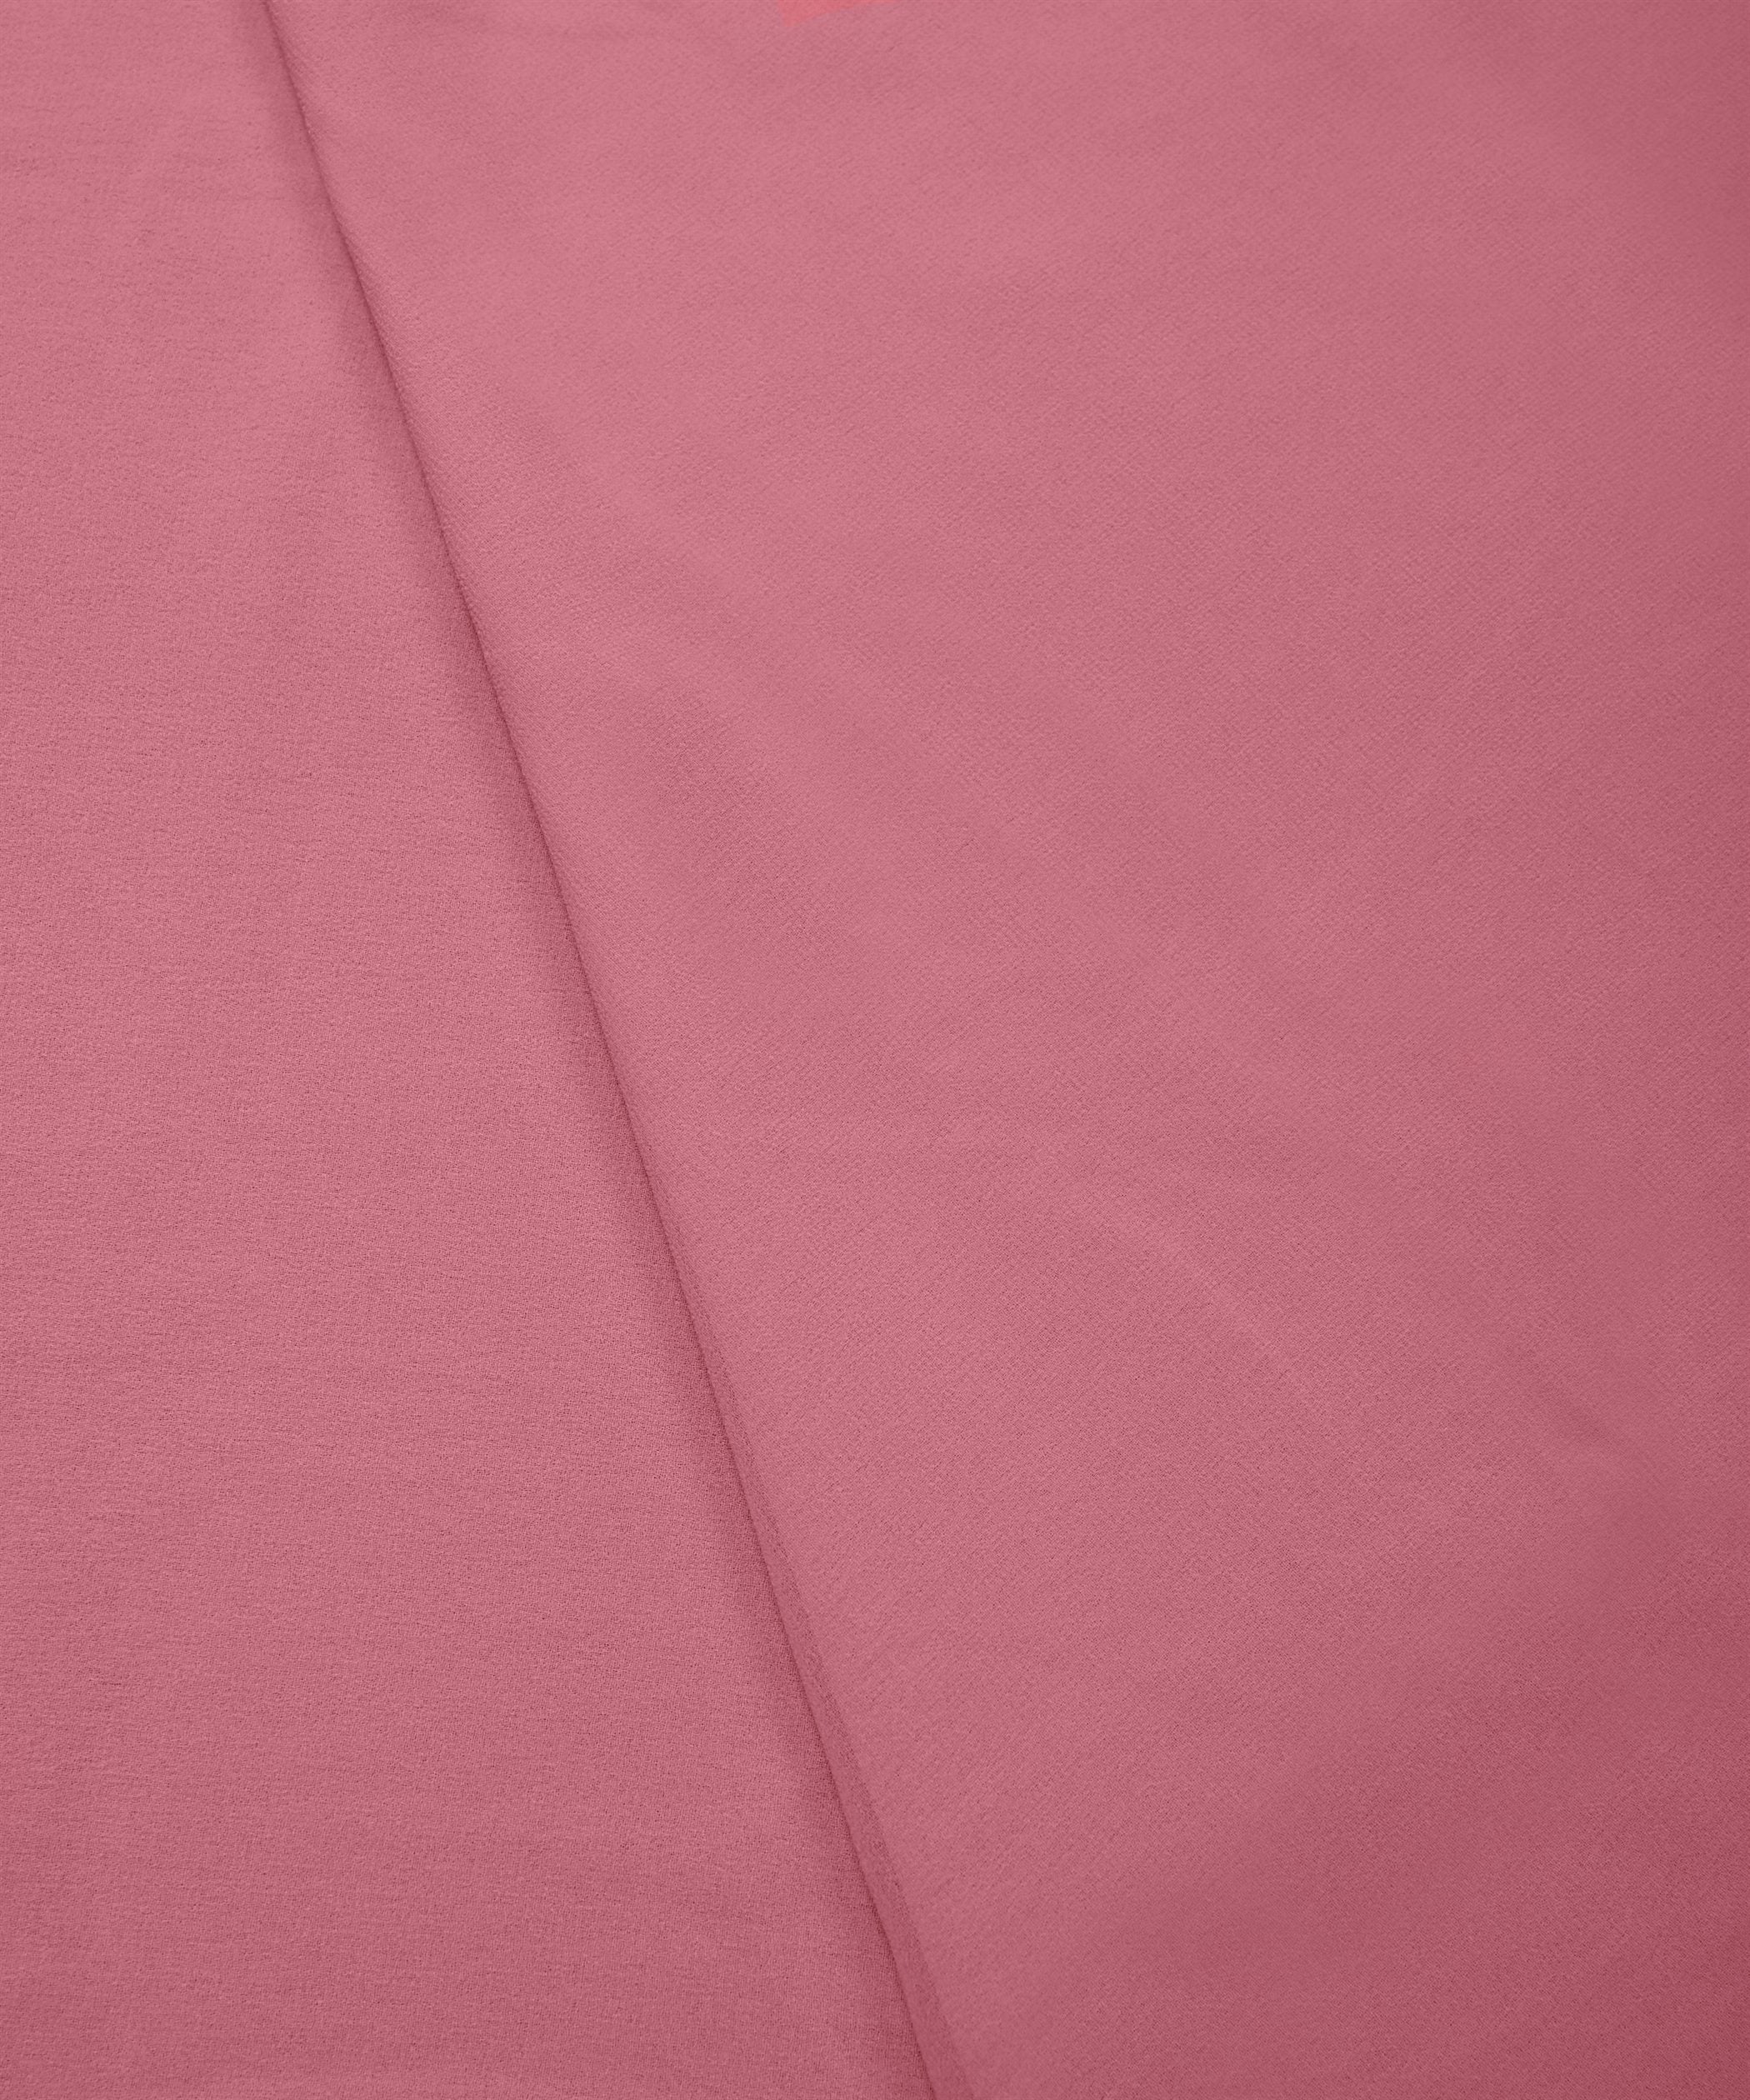 Onion Plain Dyed Georgette (60 Grams) Fabric